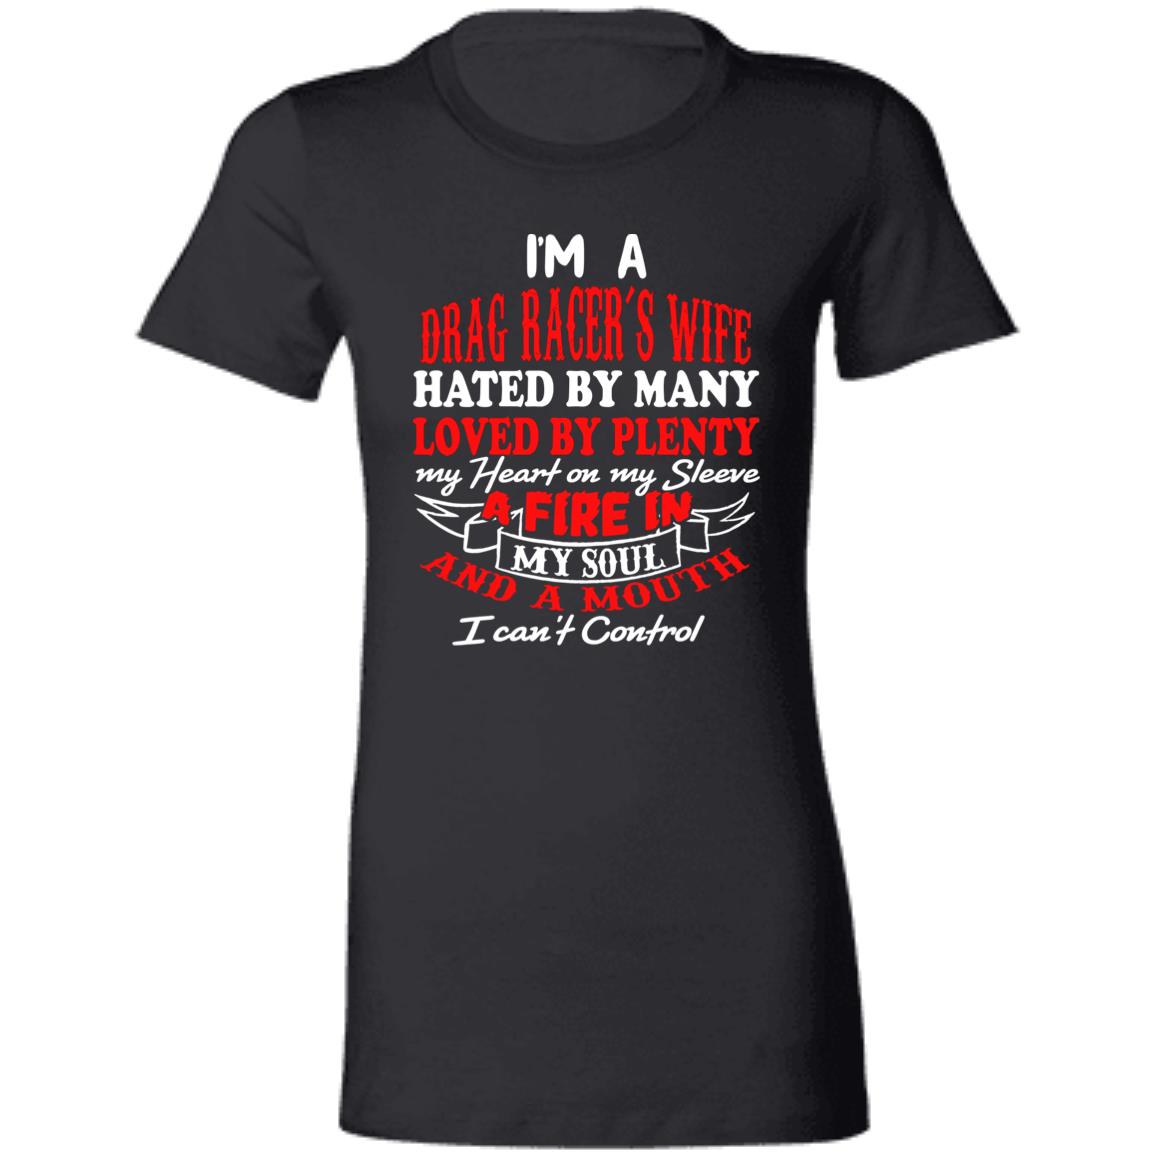 I'm A Drag Racer's Wife Hated By Many Loved By Plenty Ladies' Favorite T-Shirt